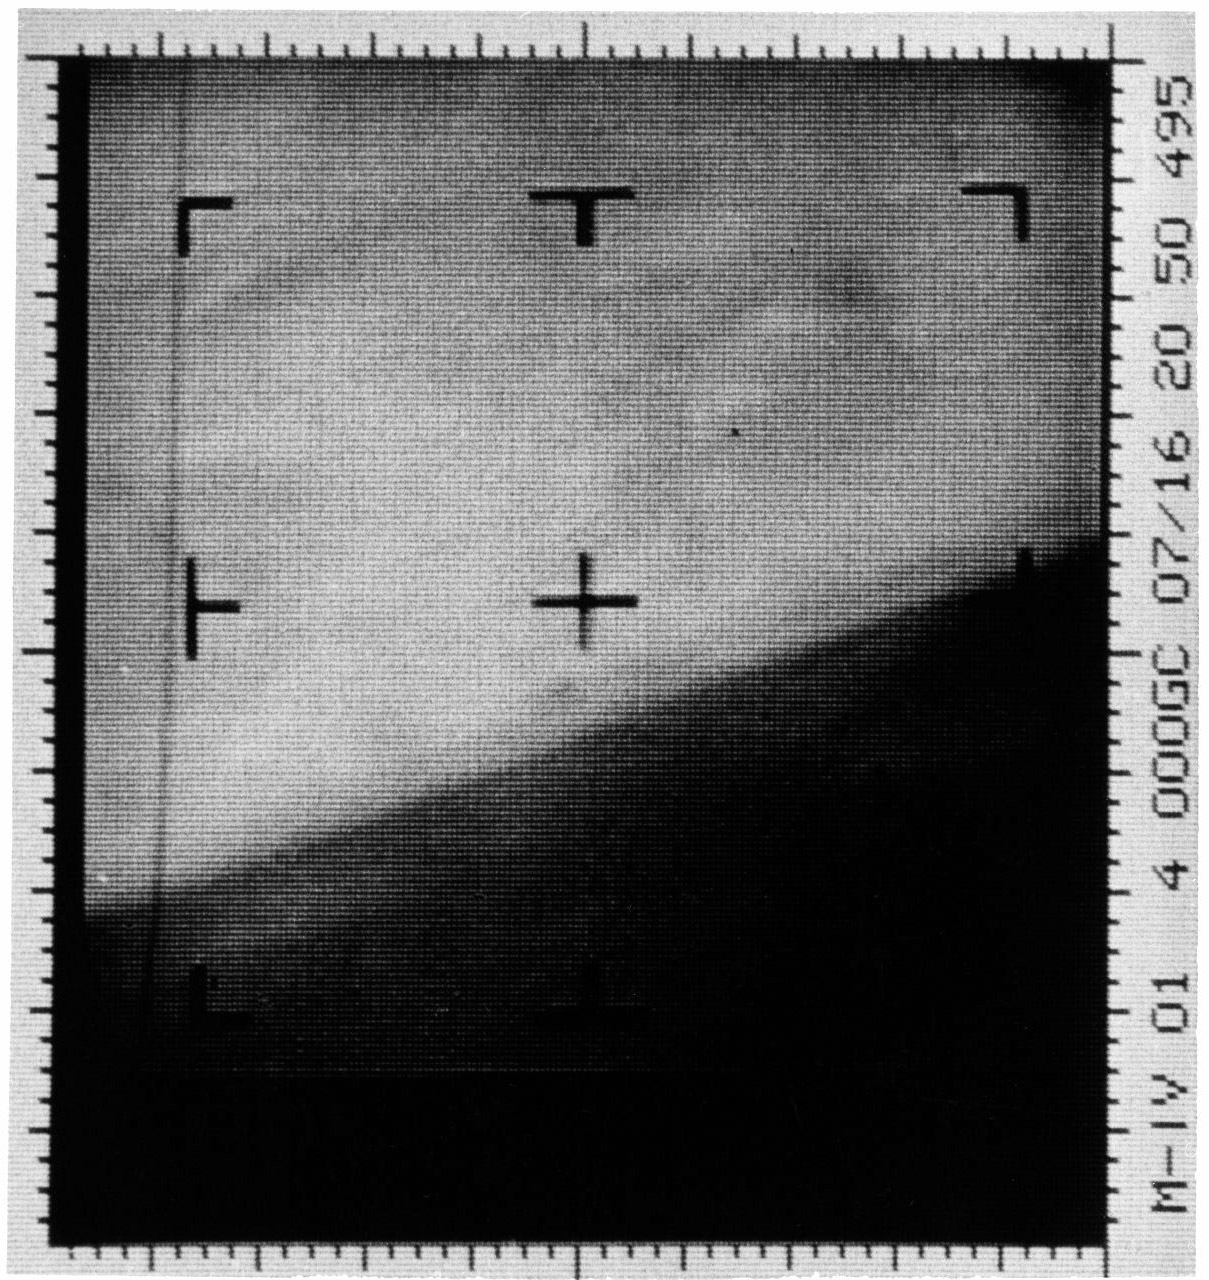 An enhanced contrast version of the first Mars photograph released on July 15, 1965 (NASA/JPL)